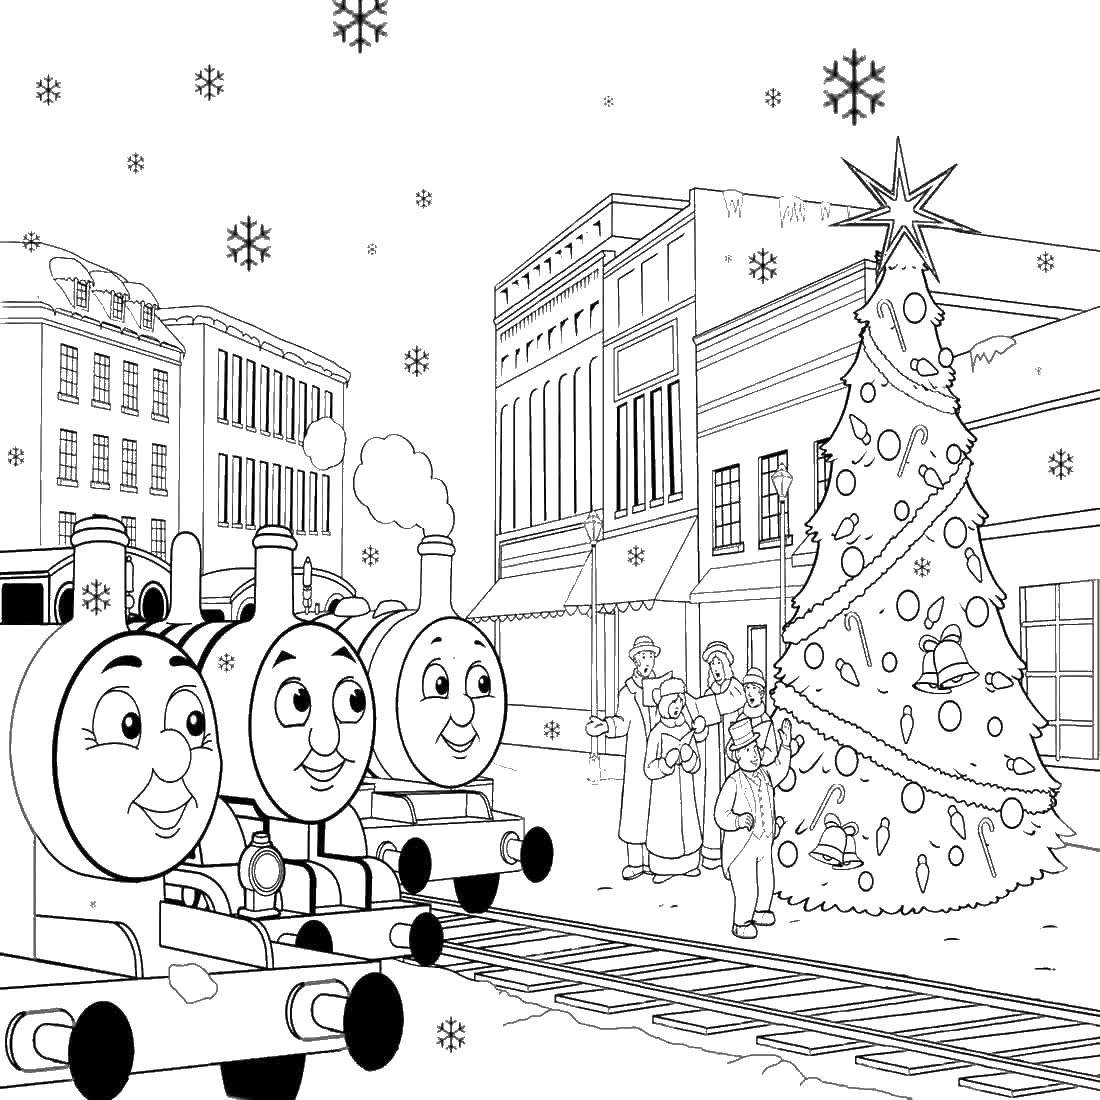 Coloring Christmas. Category train. Tags:  train cartoon, Thomas and his friends.